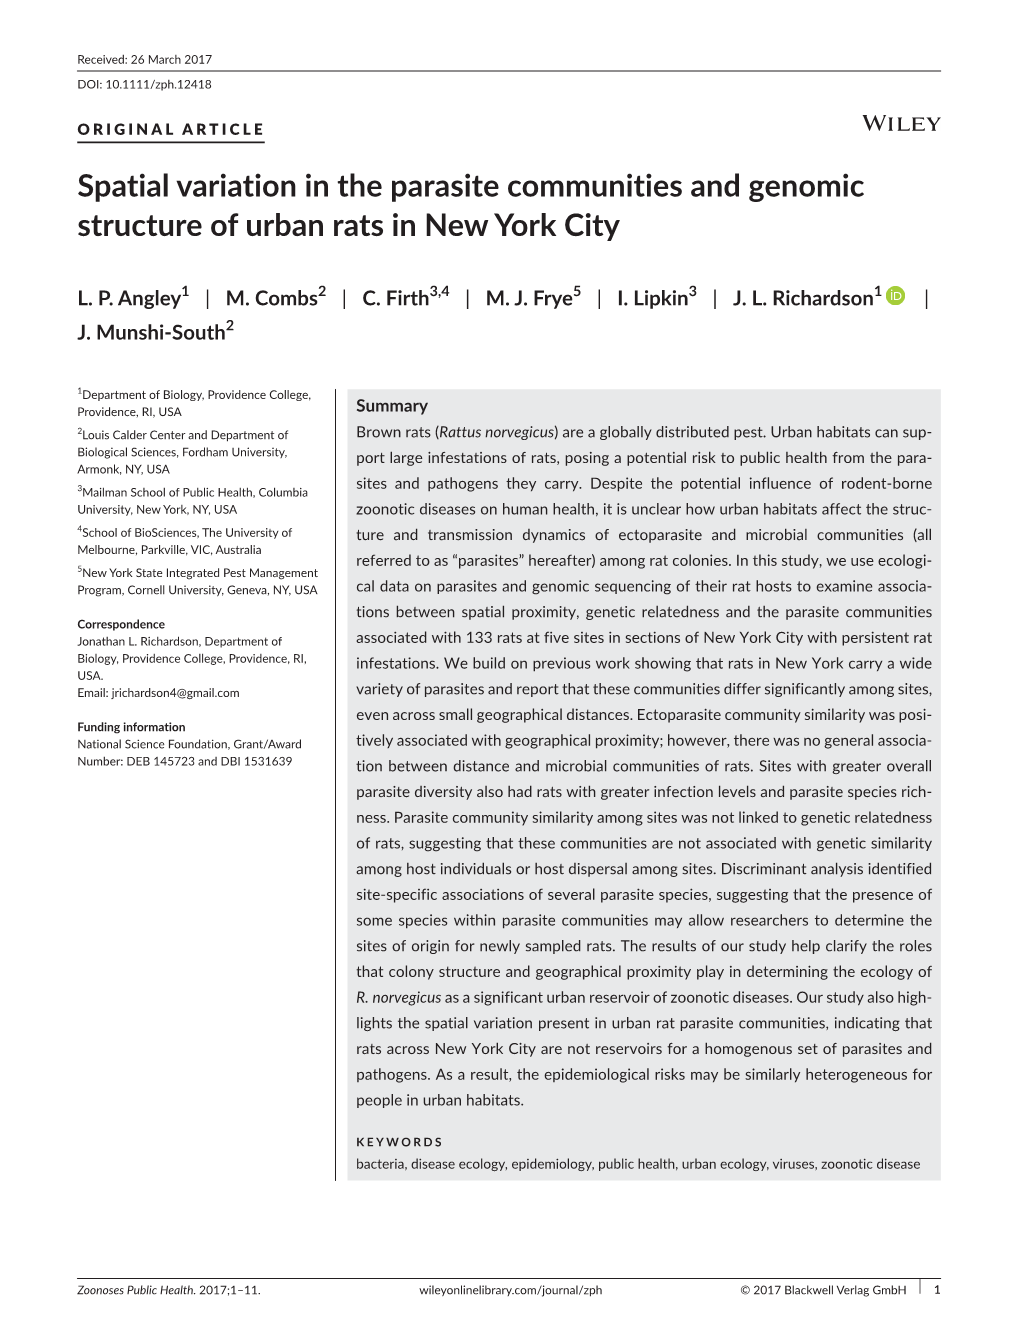 Spatial Variation in the Parasite Communities and Genomic Structure of Urban Rats in New York City